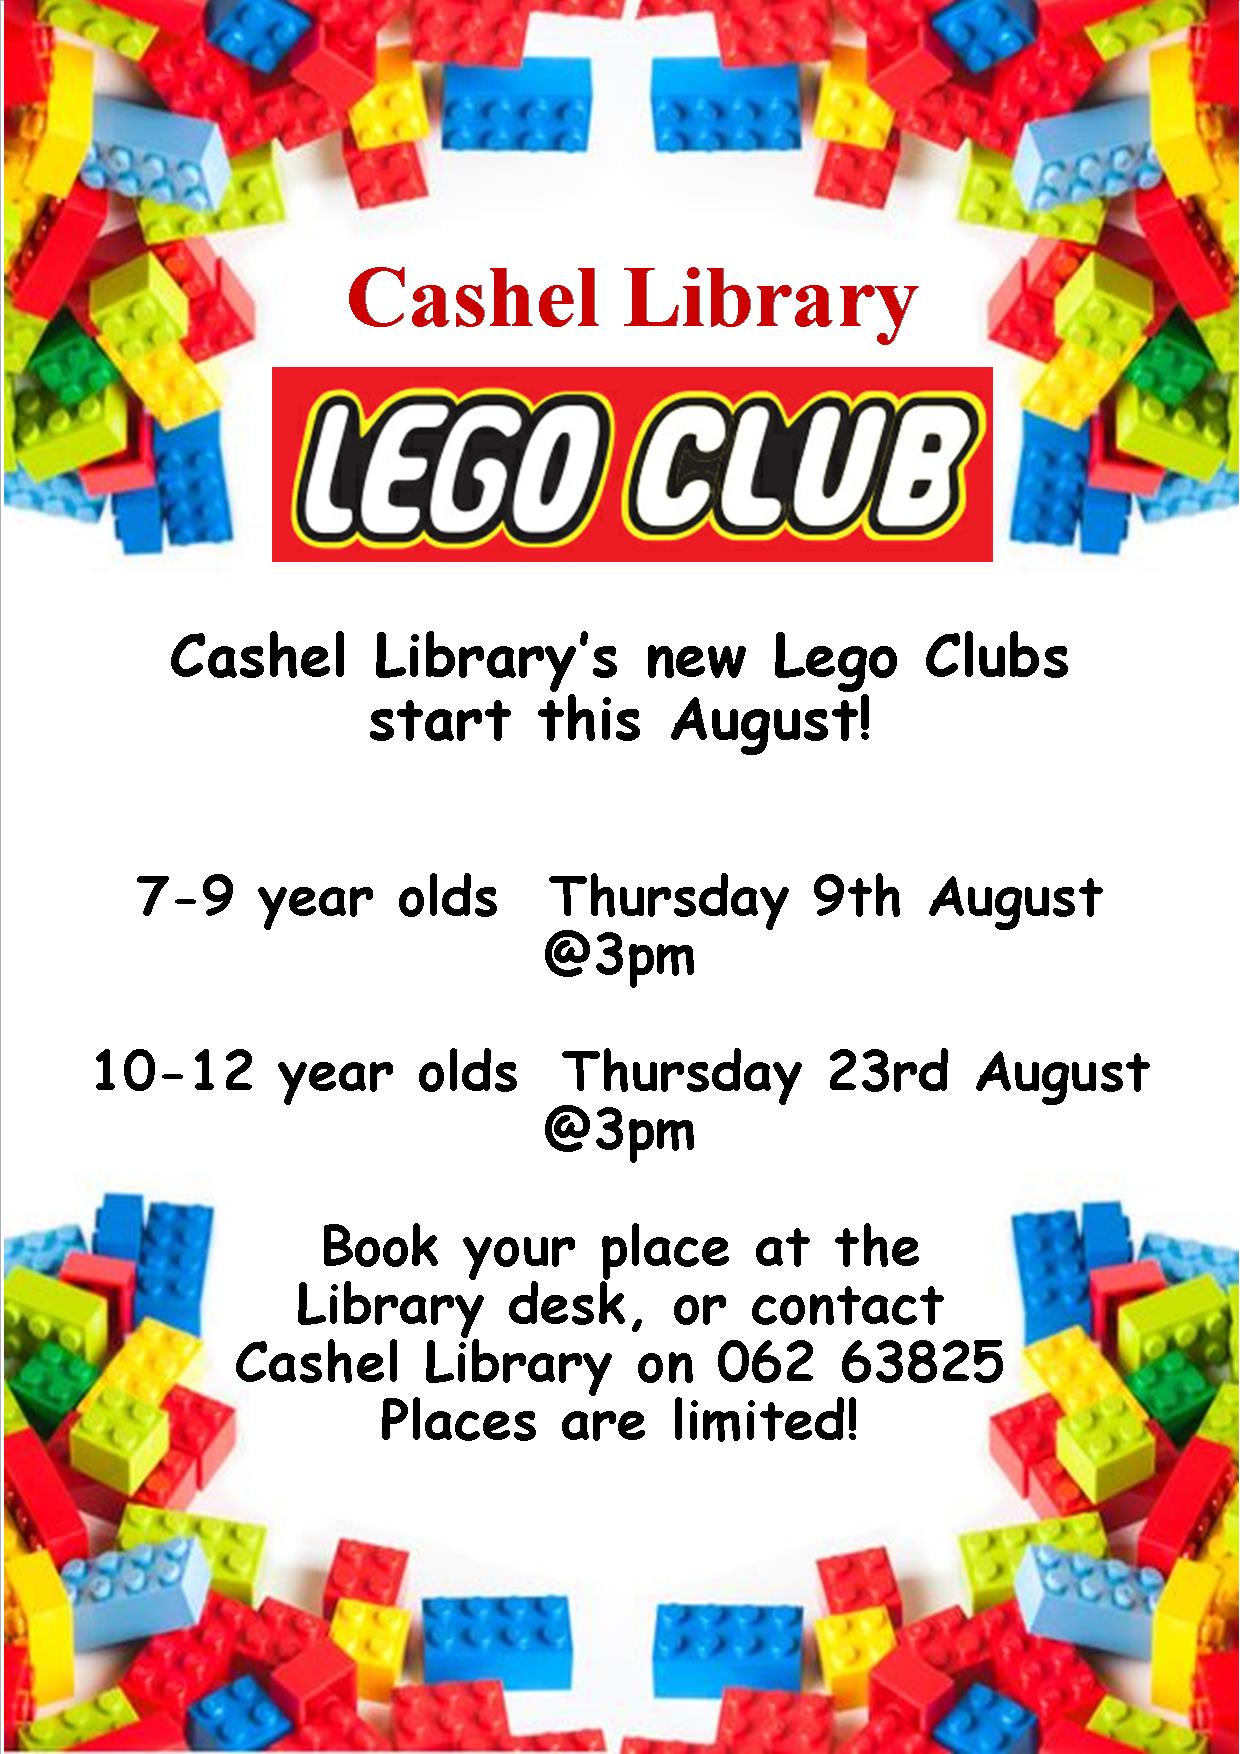 Cashel Library Lego Club – Tipperary Library Service